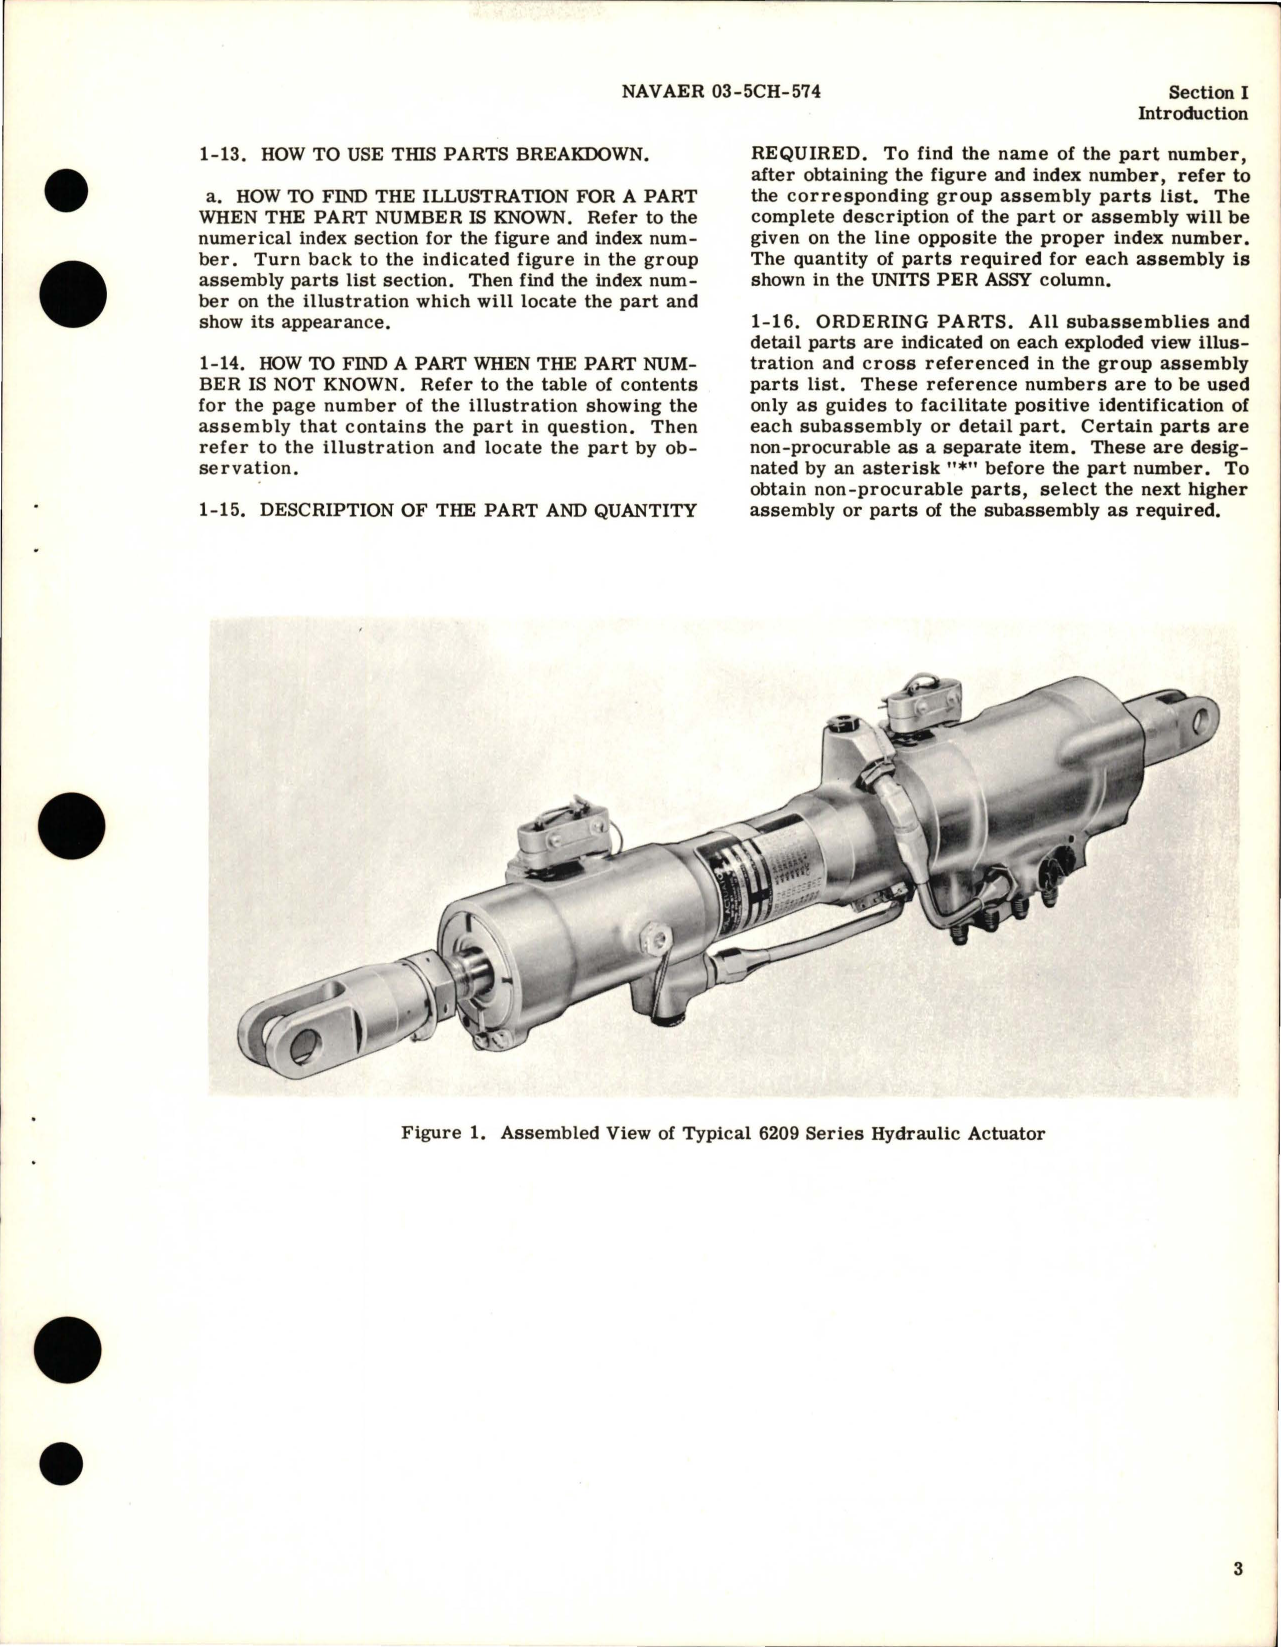 Sample page 5 from AirCorps Library document: Illustrated Parts Breakdown for Hydraulic Actuator - Models 6209C, 6209D, 6209E 